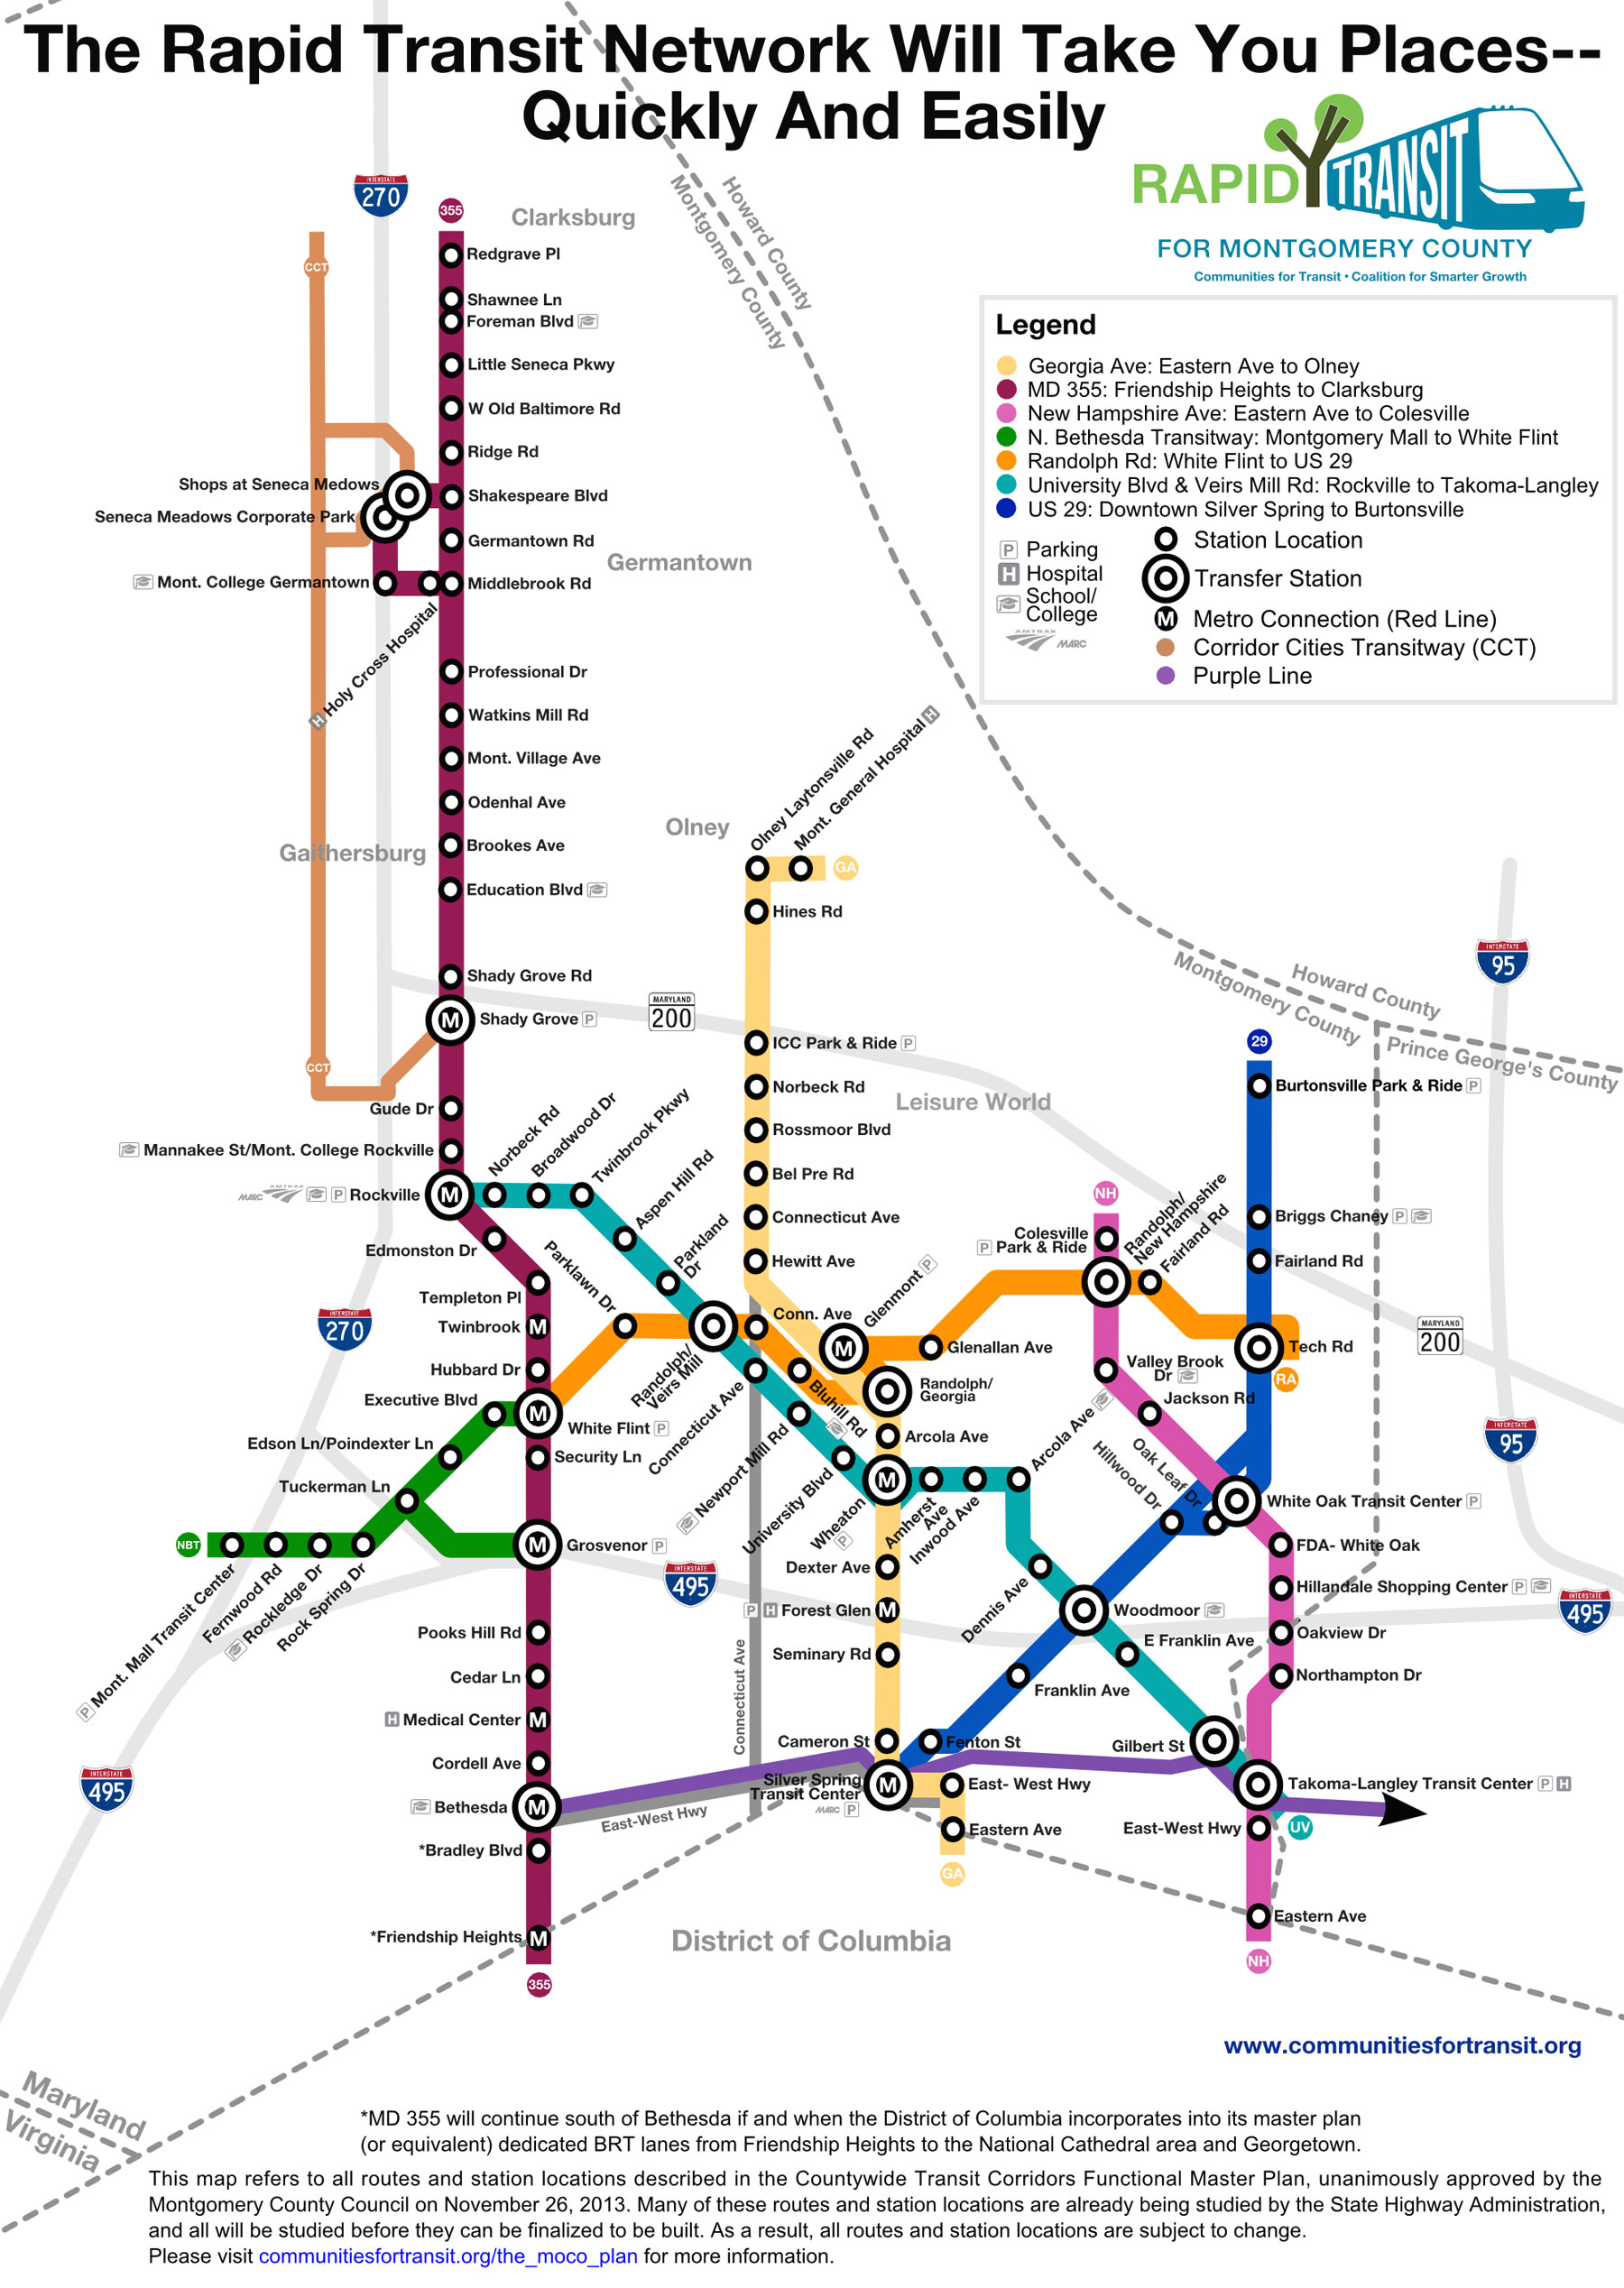 Montgomery County paves the way for bus network that could zip by traffic